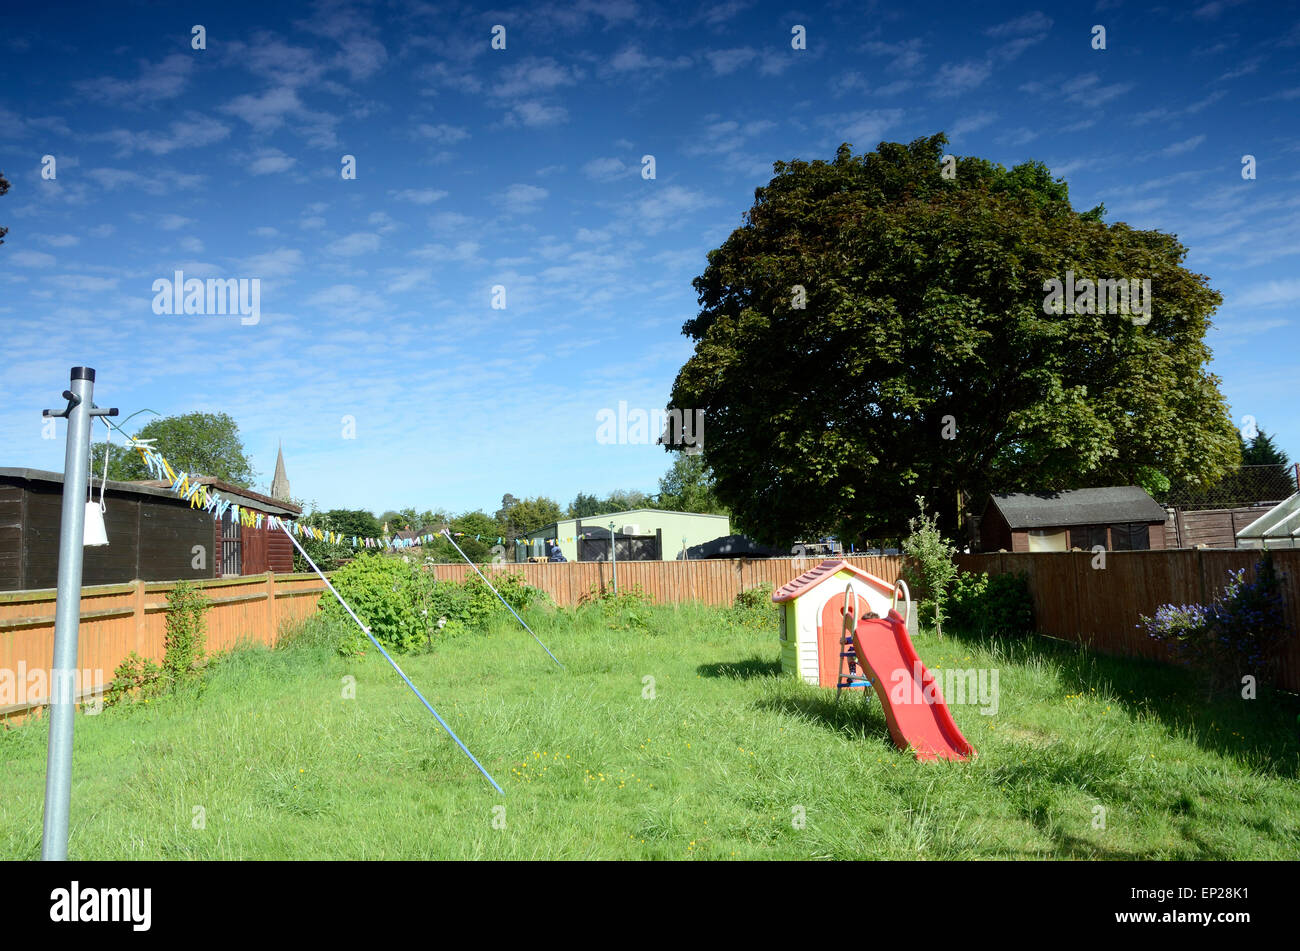 A view of a back garden with overgrown grass, a washing line, a child's play house and a slide. Stock Photo